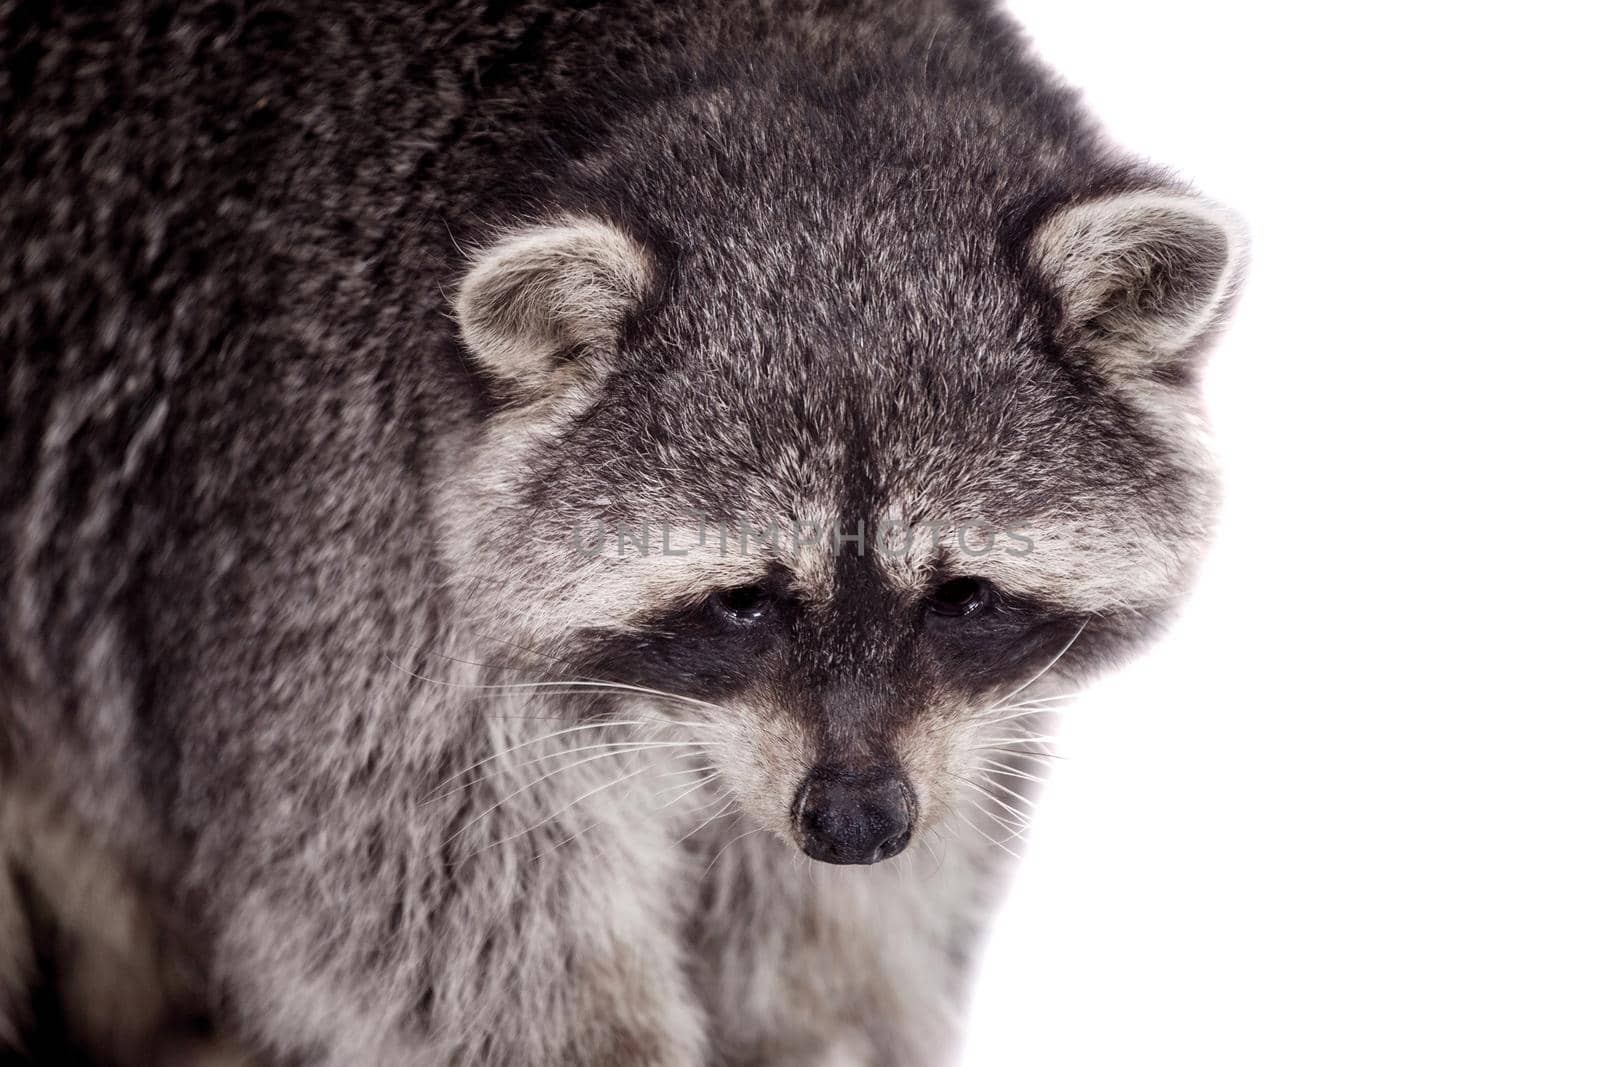 Raccoon, 3 years old, isolated on the white background